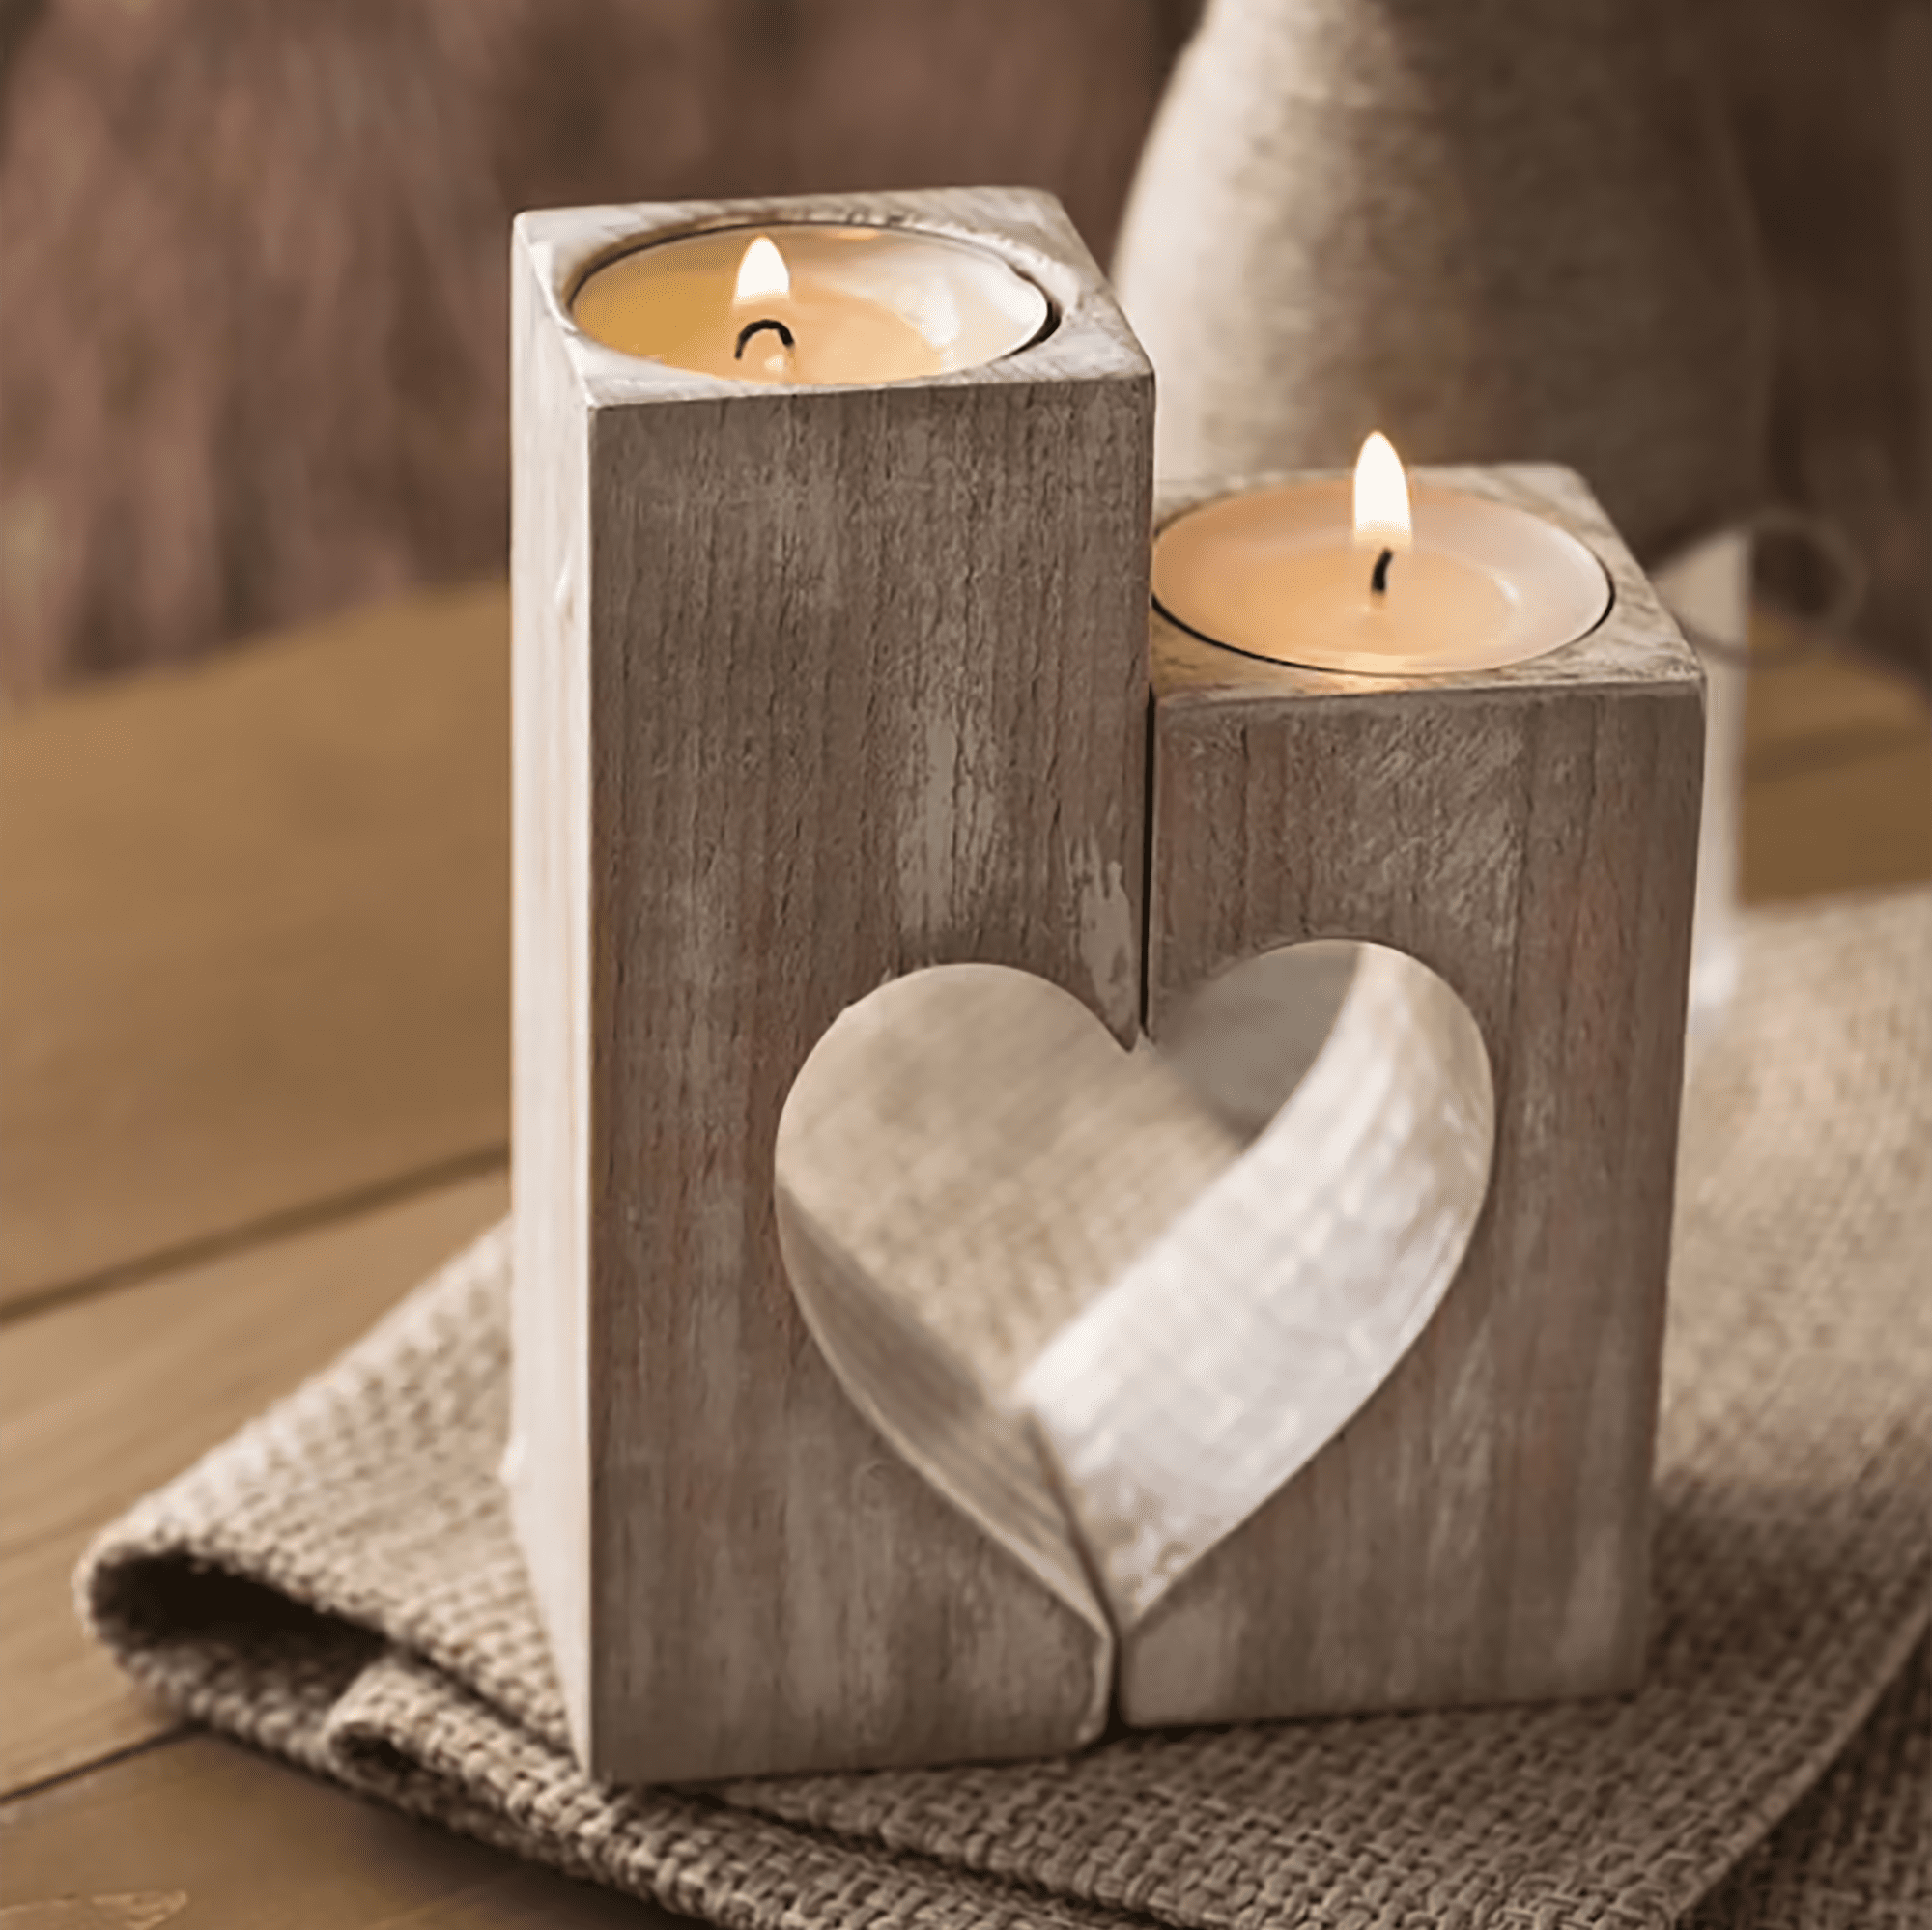 Wood Candle Holders | Heart Shape Mother’s Day Gift | Rustic Wooden Decorative Tealight Candles | Wedding Gift | Home Decorations Gift